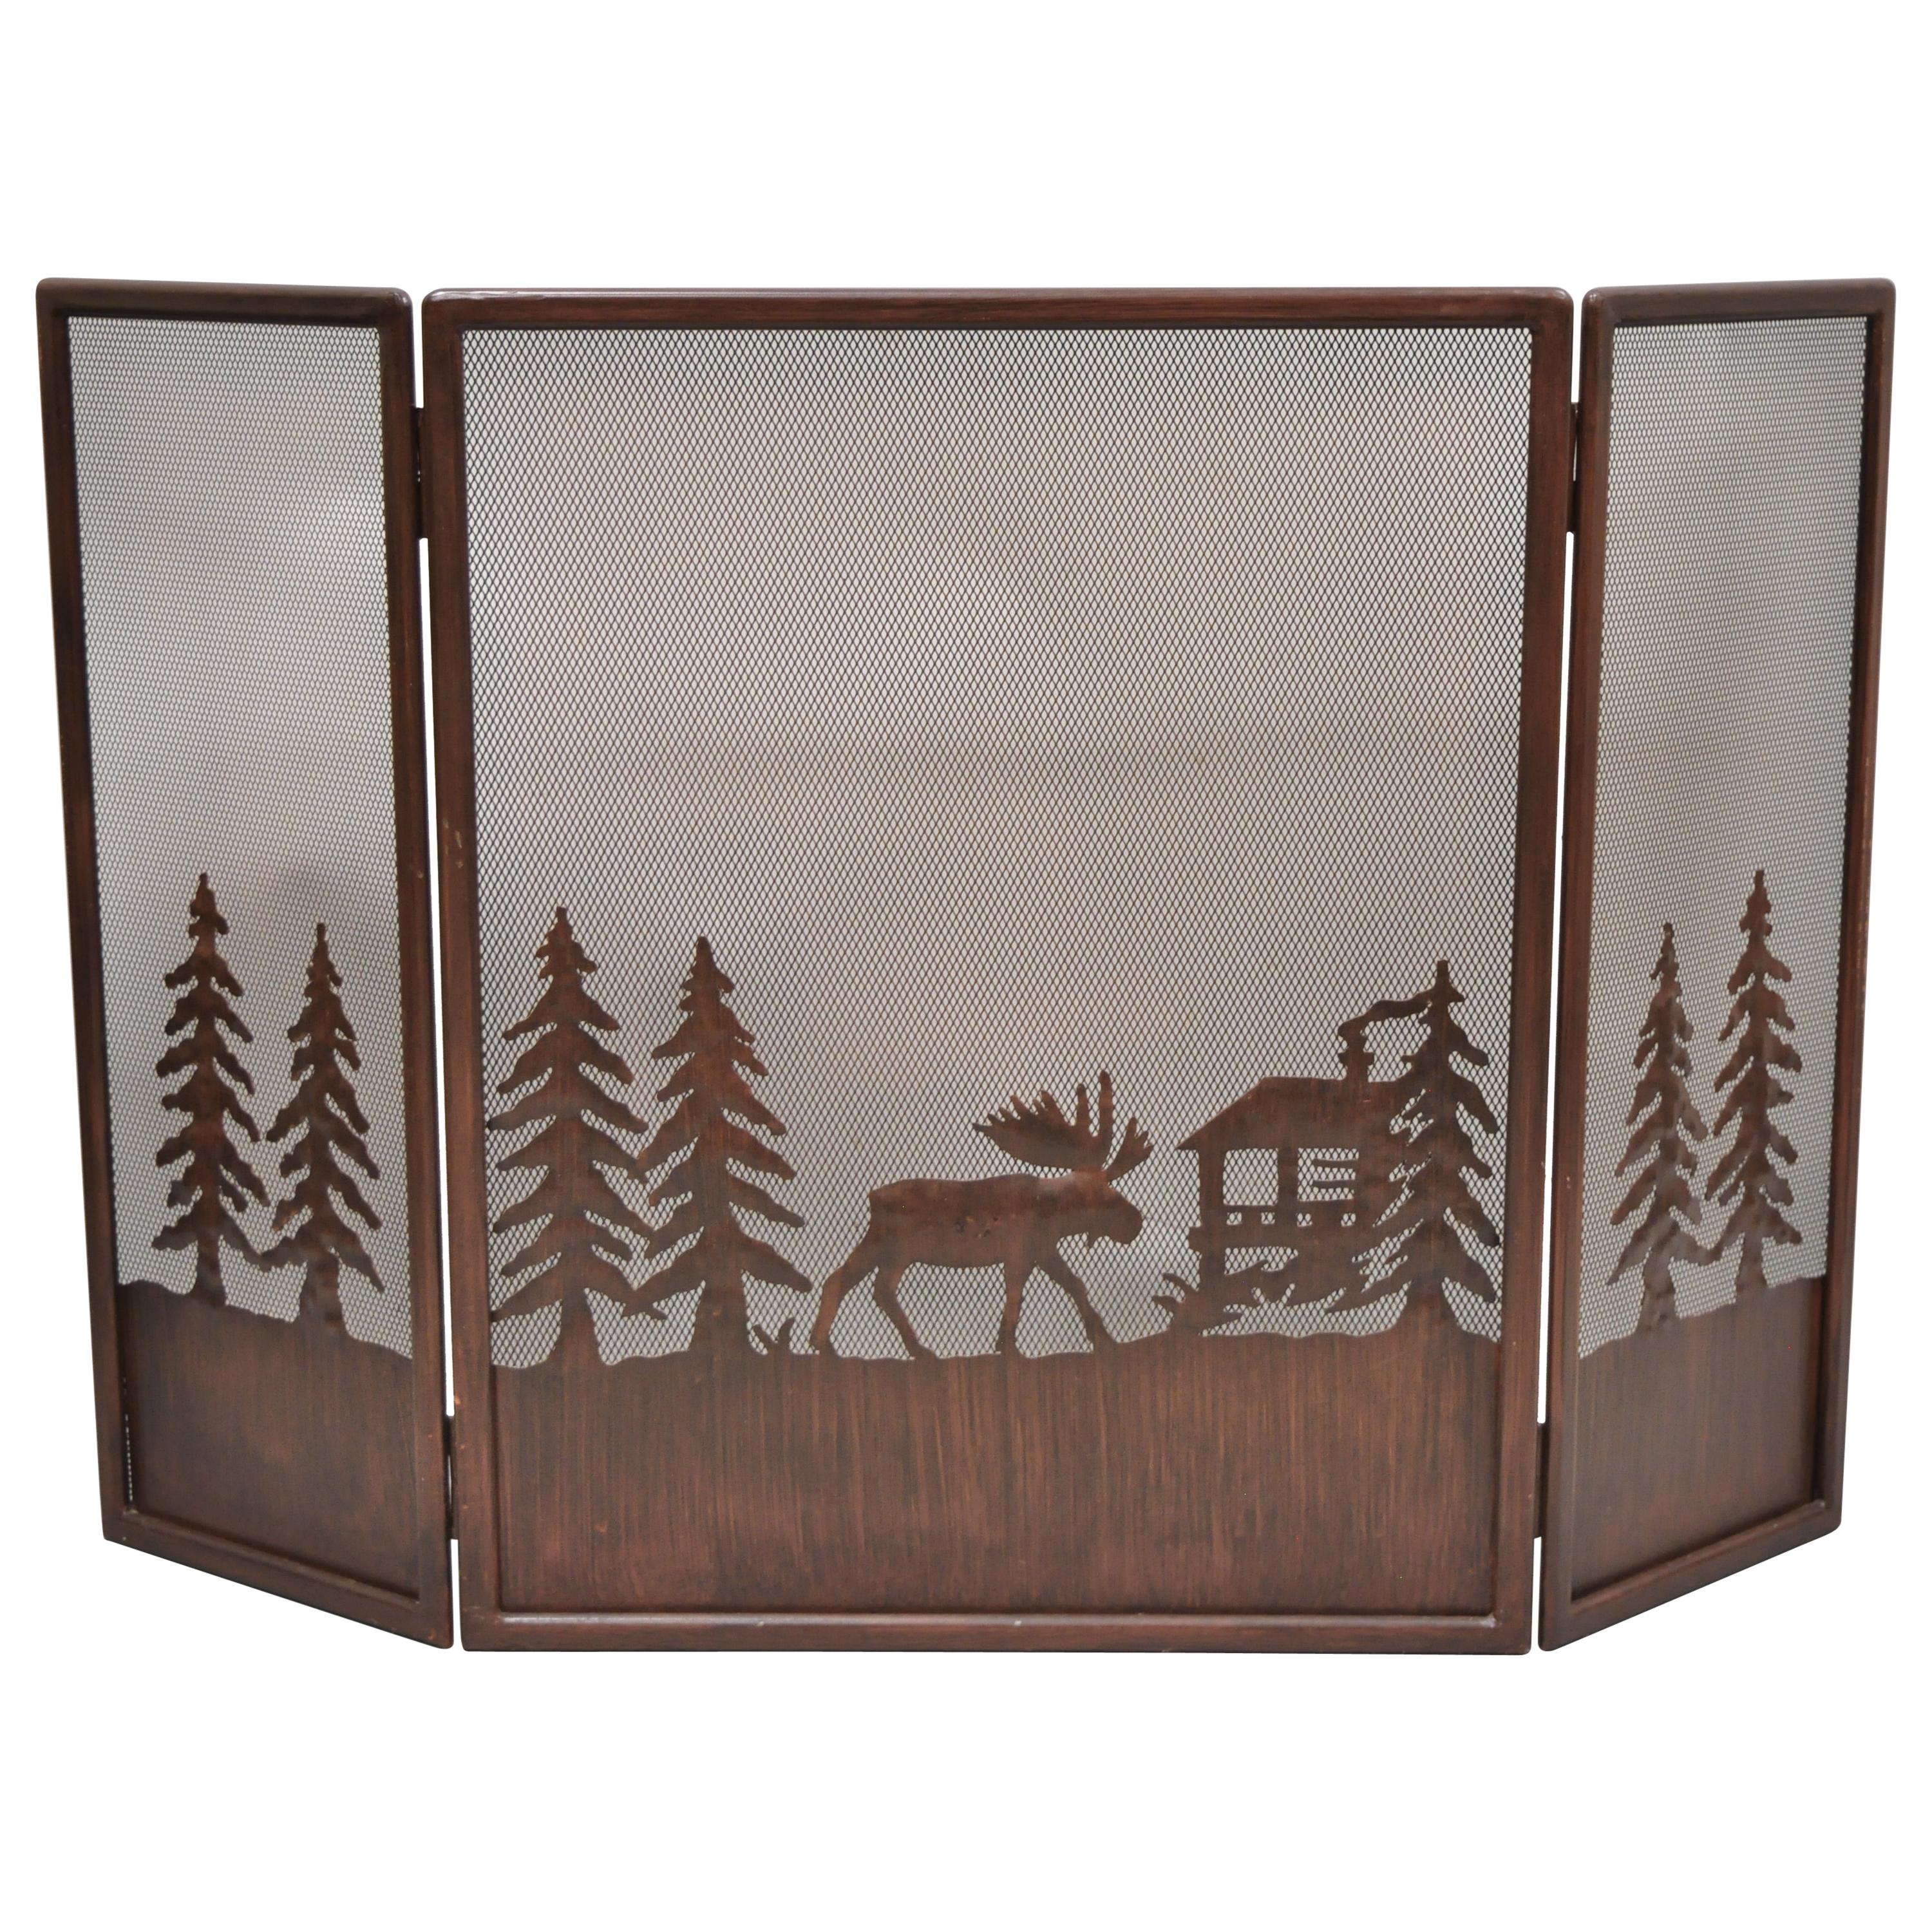 Moose Wilderness Log Cabin Rustic Iron Folding Fireplace Mantle Screen For Sale